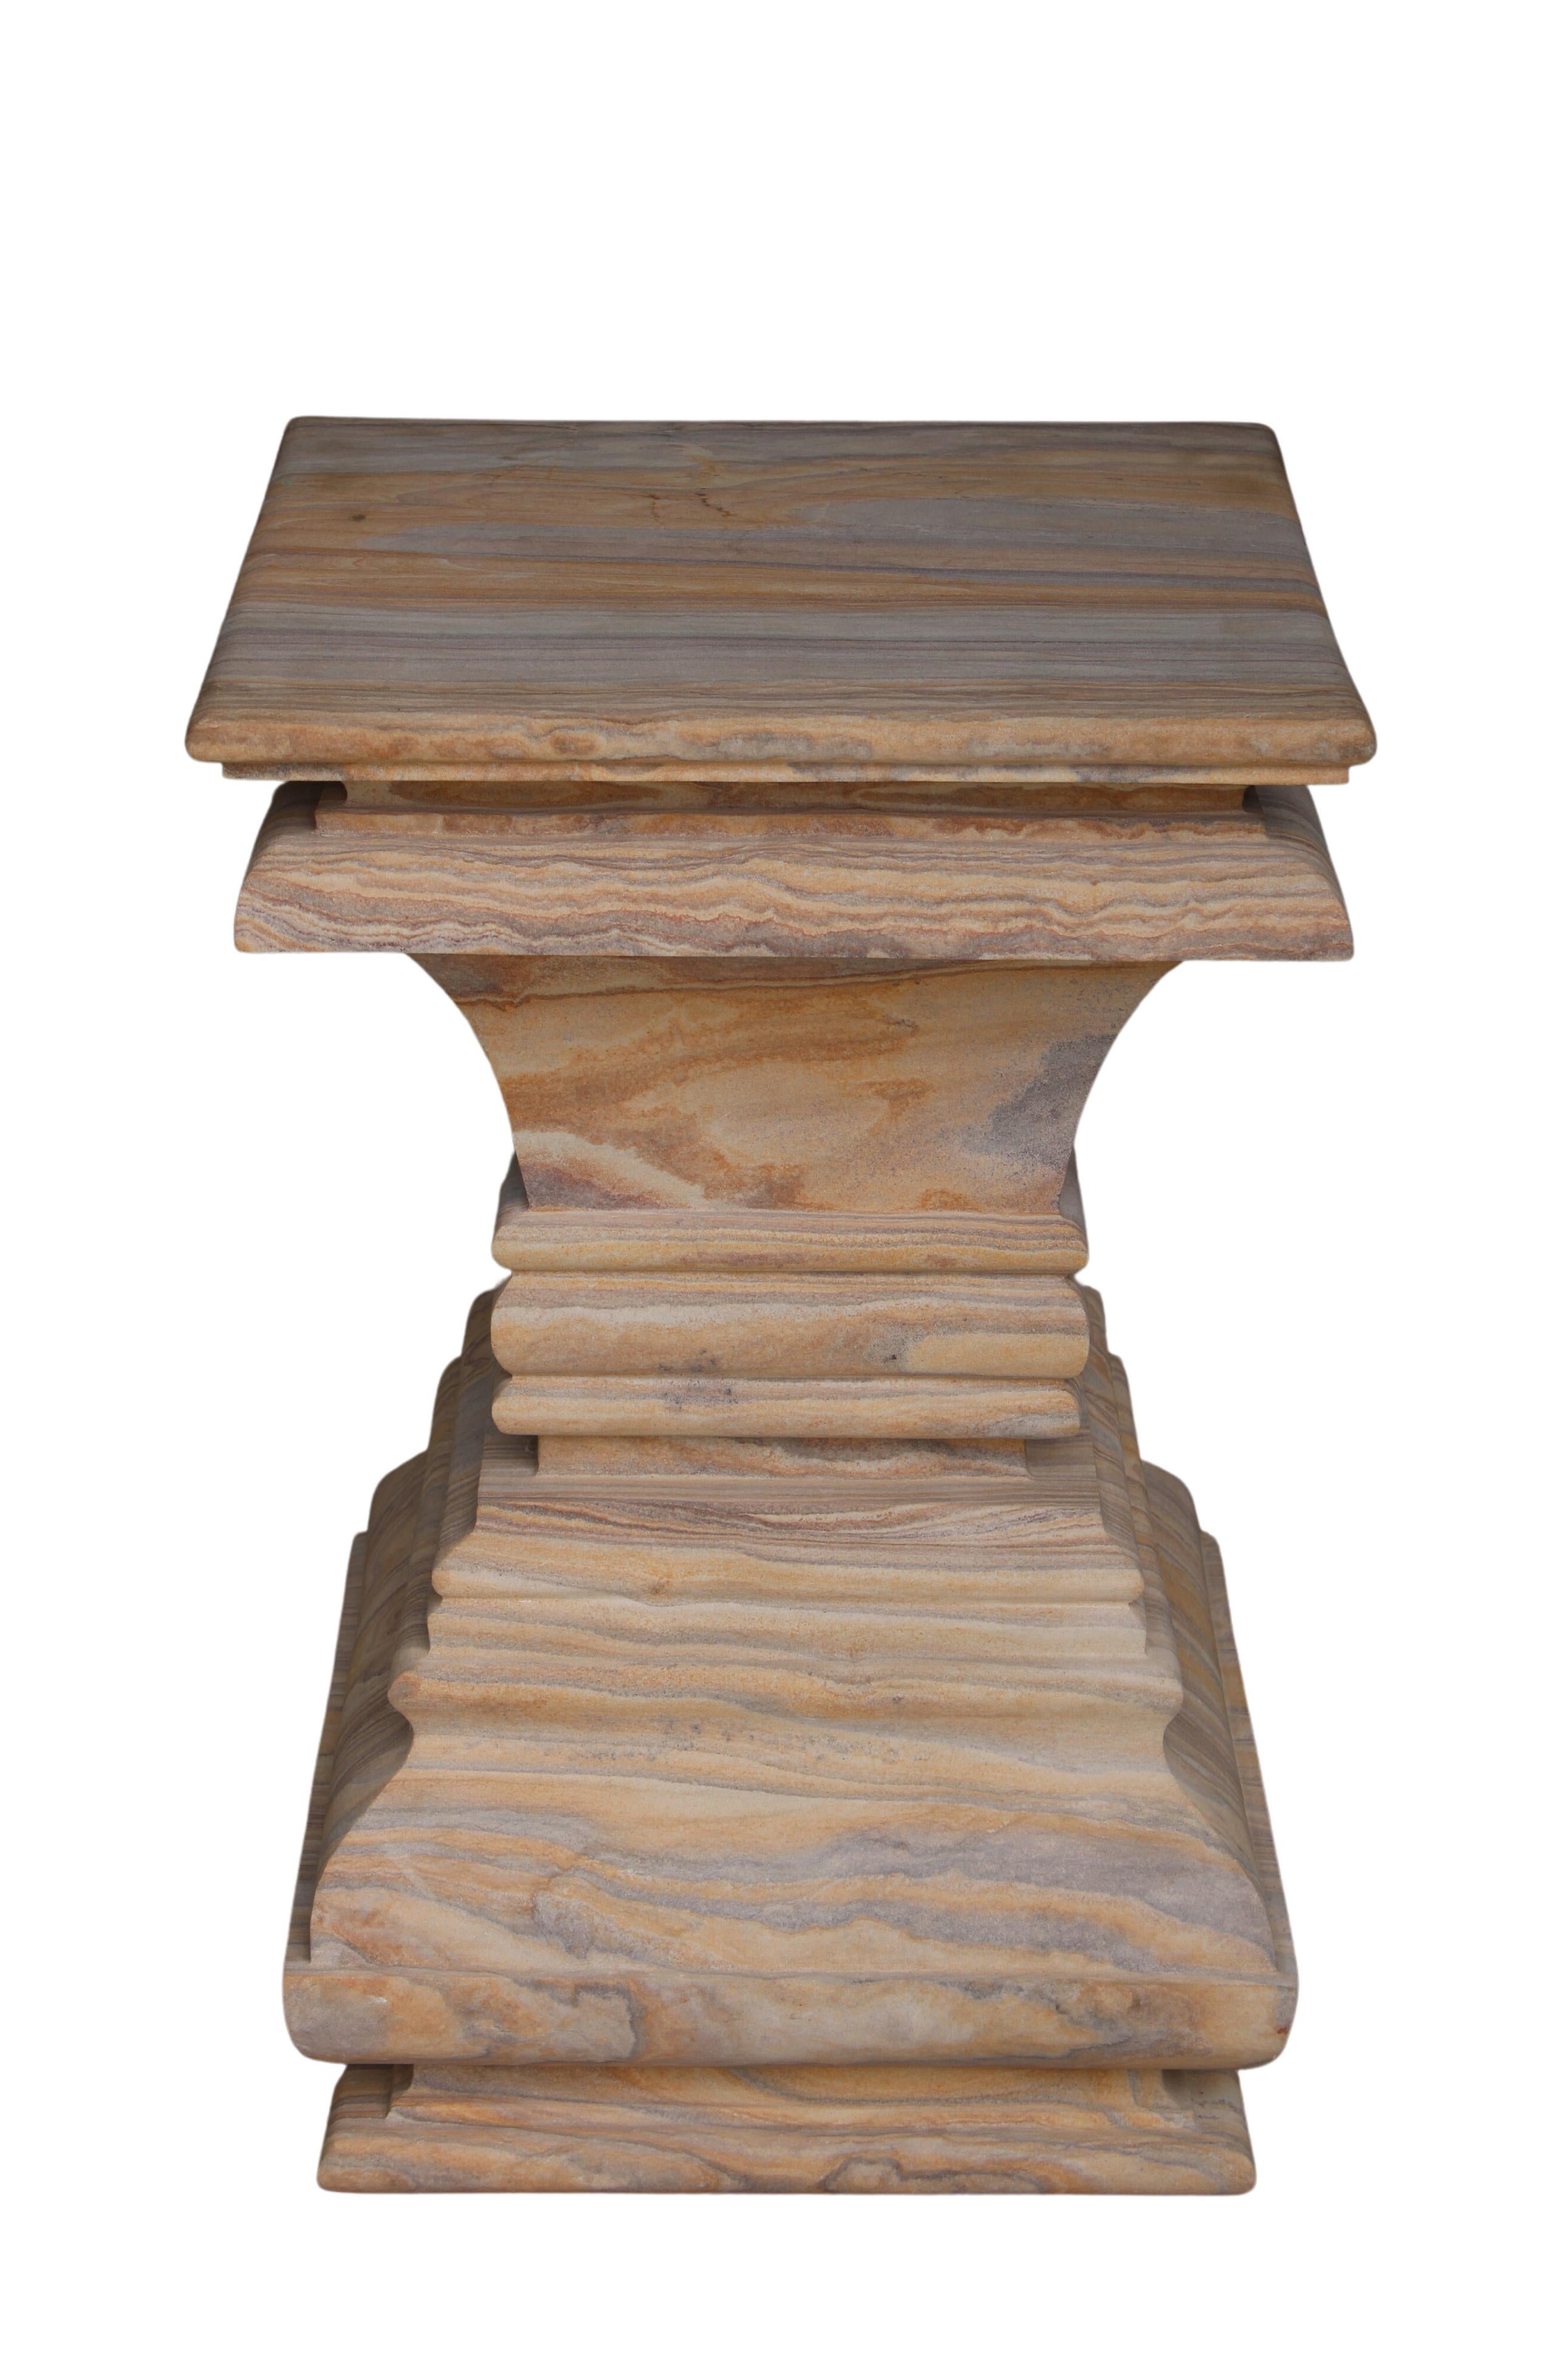 Hand-Carved Modern Square Architectural Pedestal Side Table in Rainbow Teakwood Stone For Sale